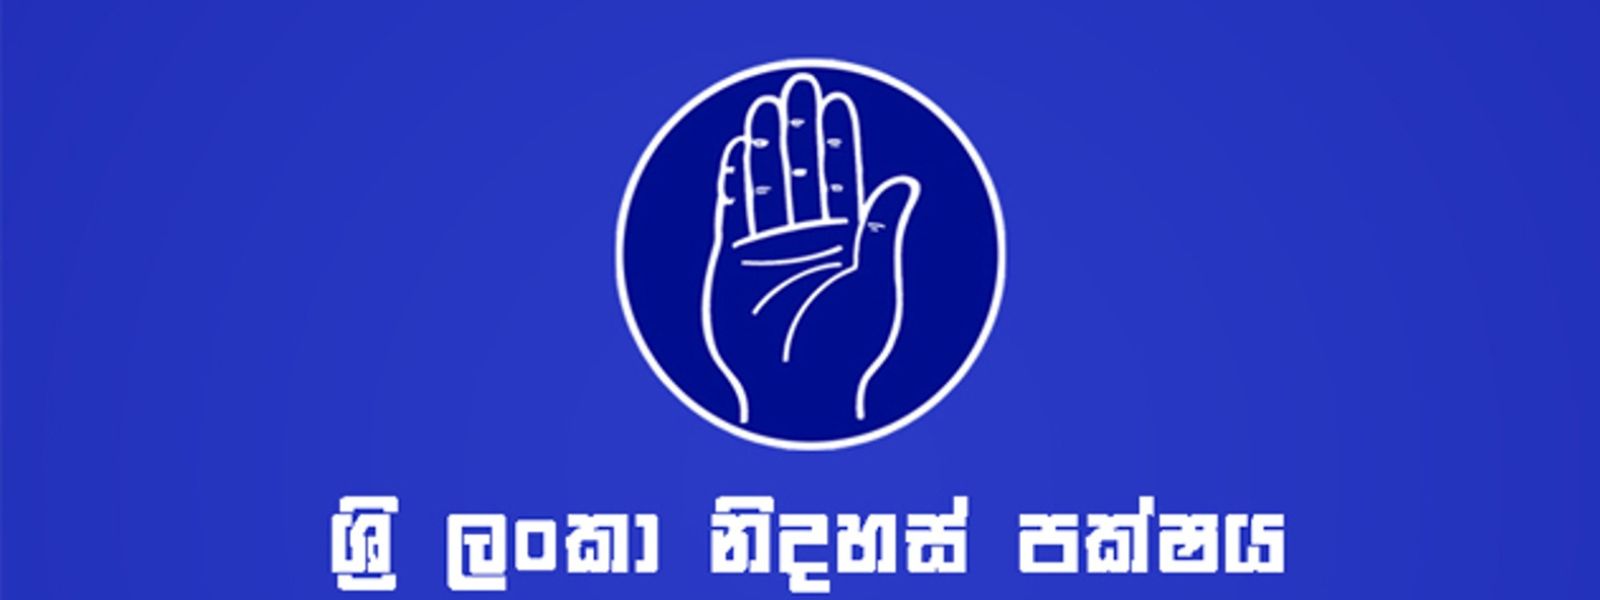 One faction of SLFP rejects new party Chairman